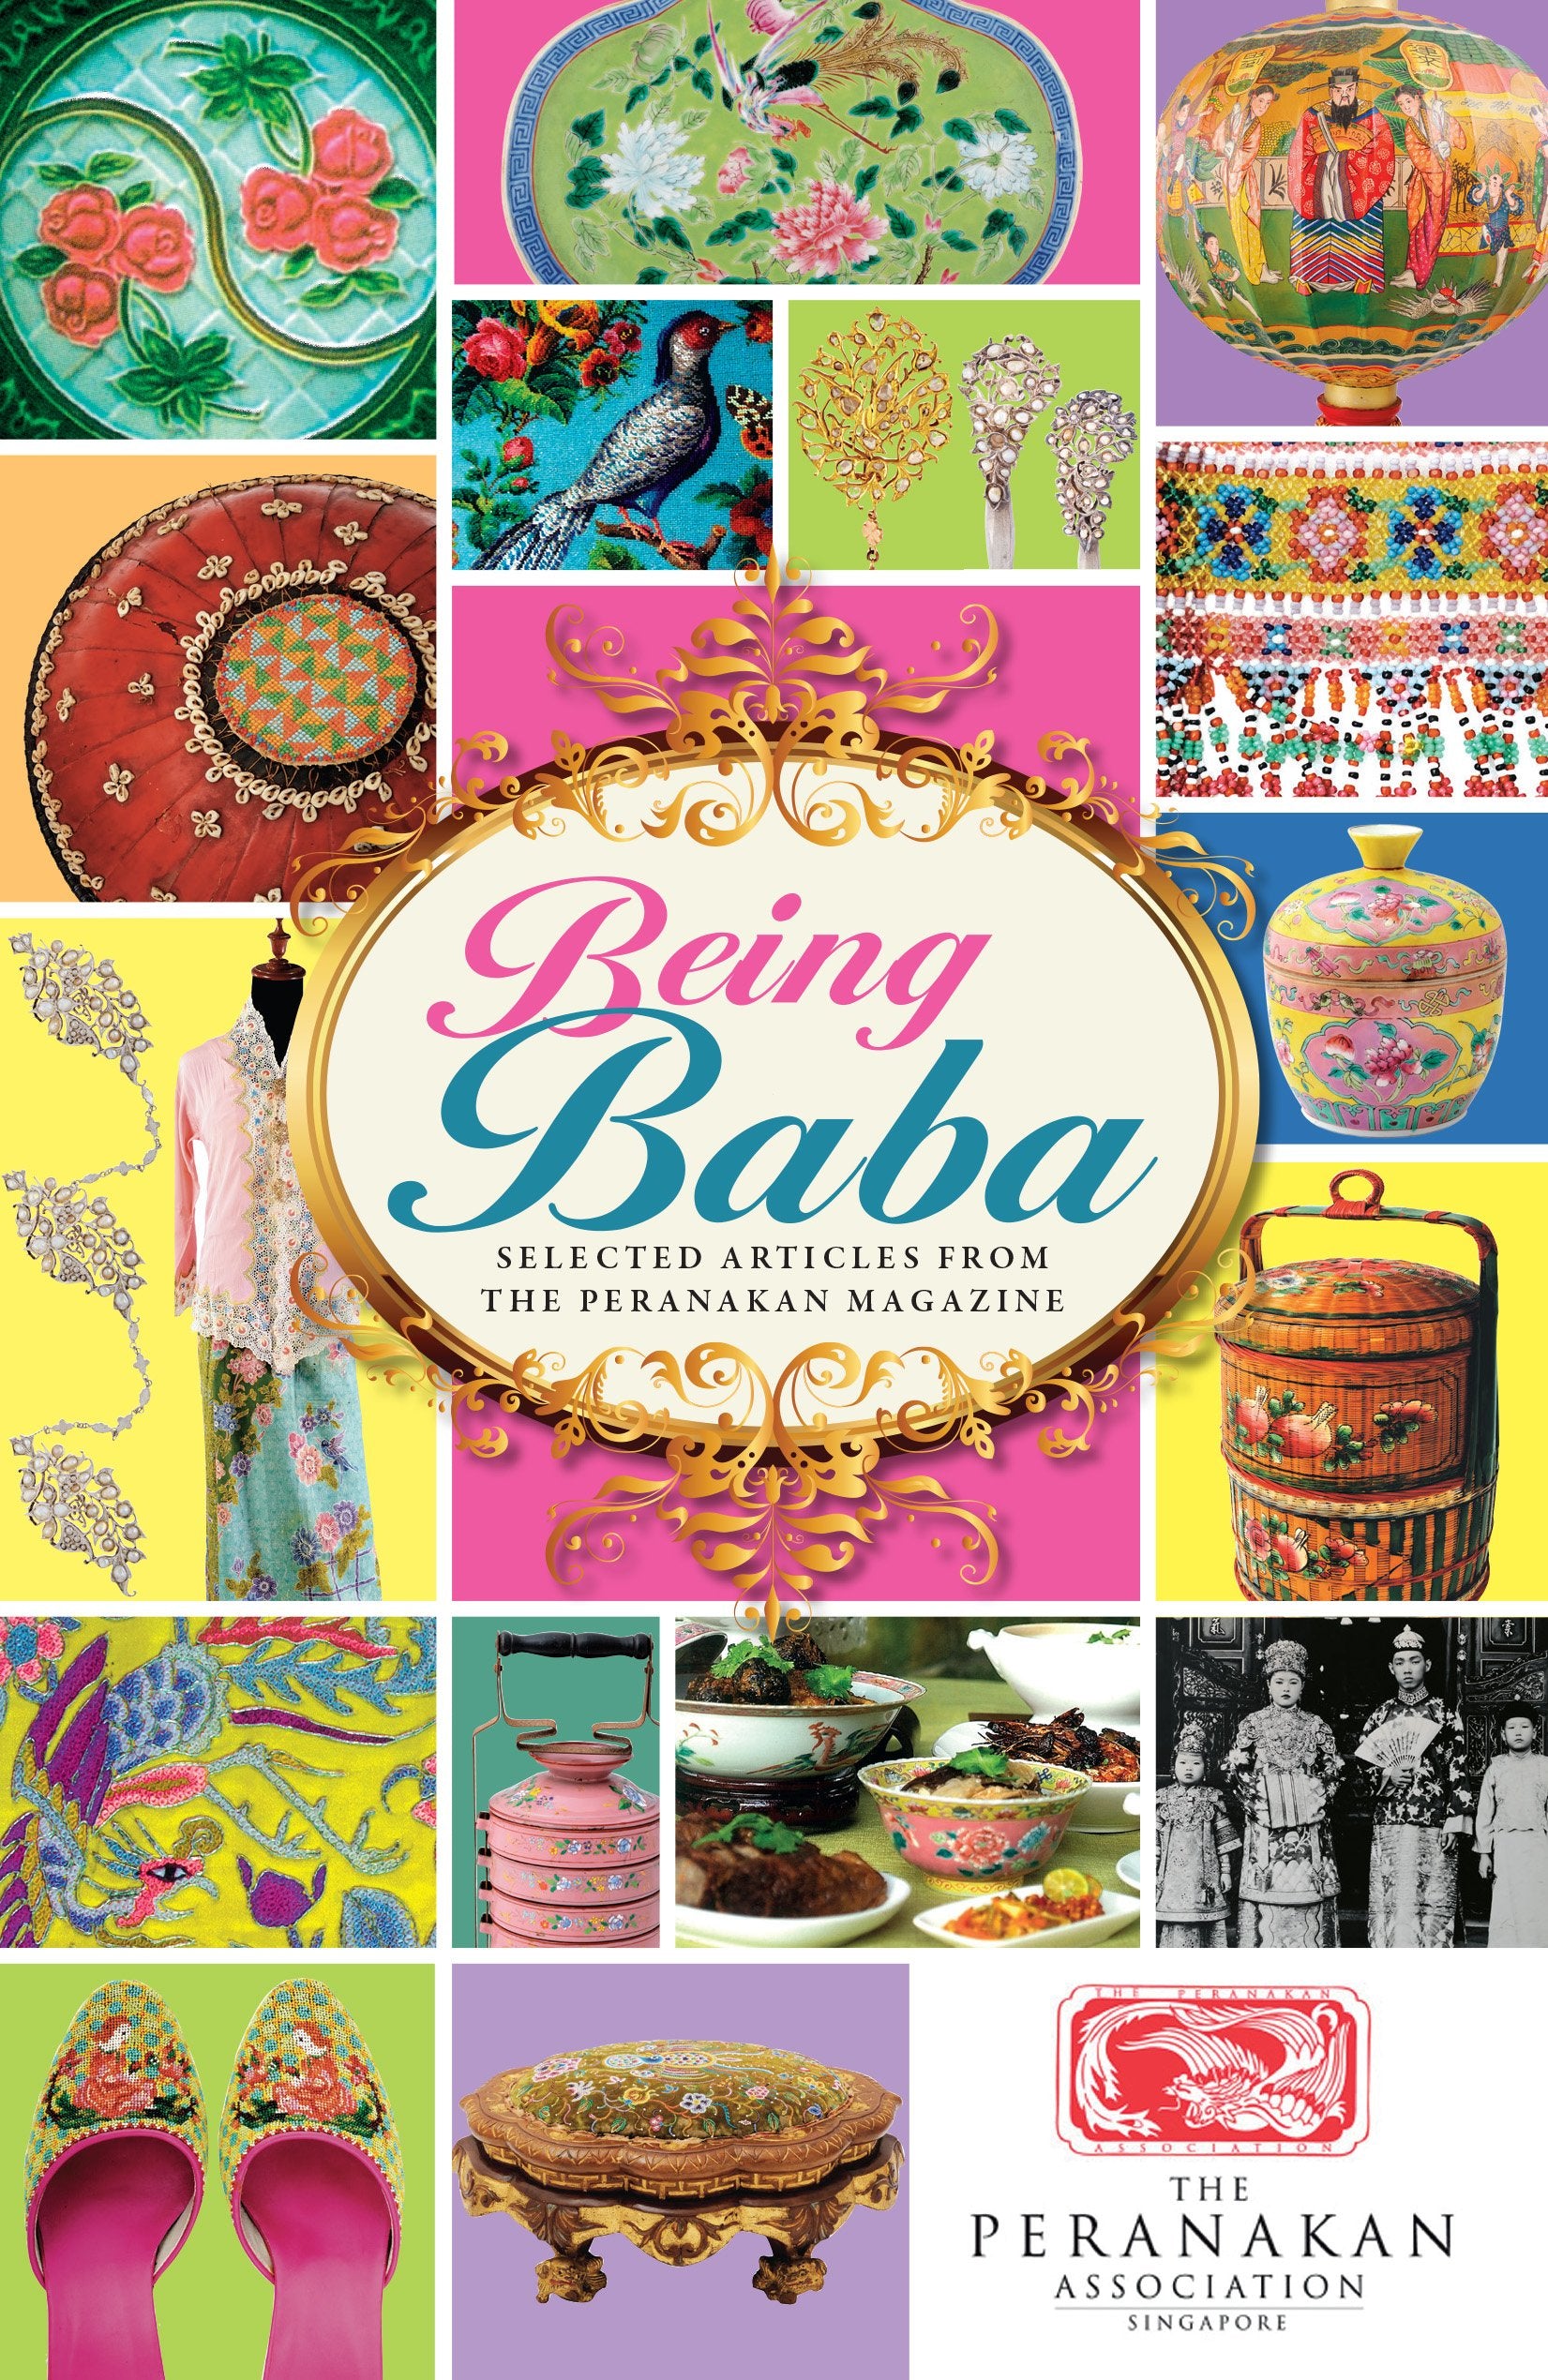 Being Baba: Selected Articles from The Peranakan Magazine